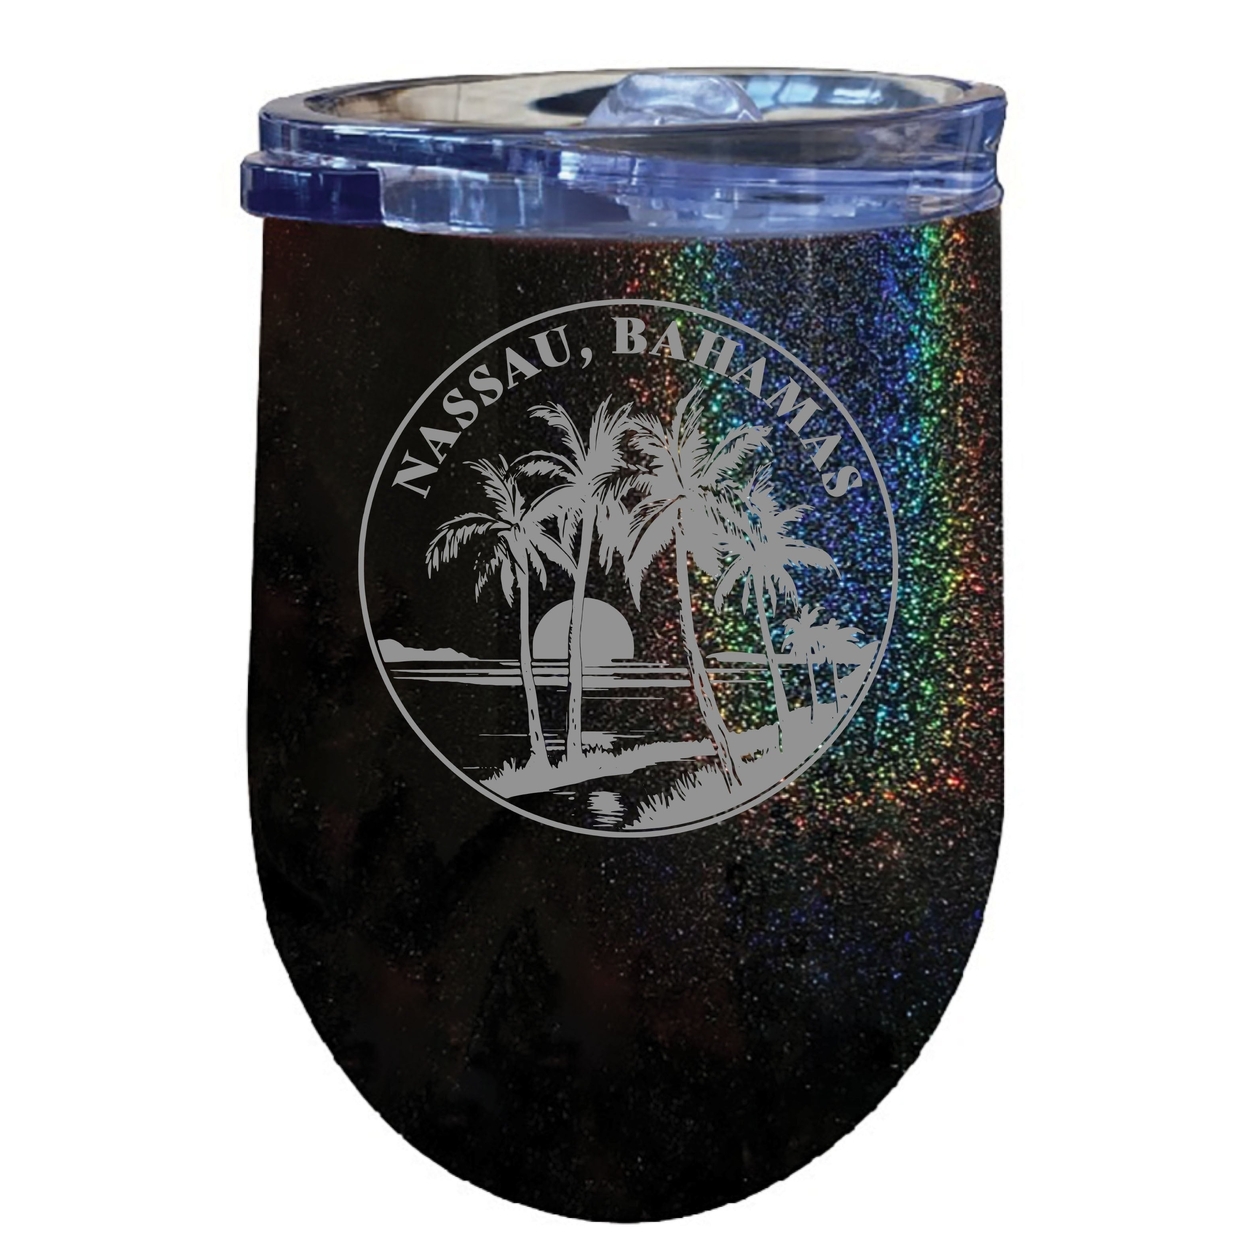 Nassau The Bahamas Souvenir 12 Oz Engraved Insulated Wine Stainless Steel Tumbler - Black,,2-Pack